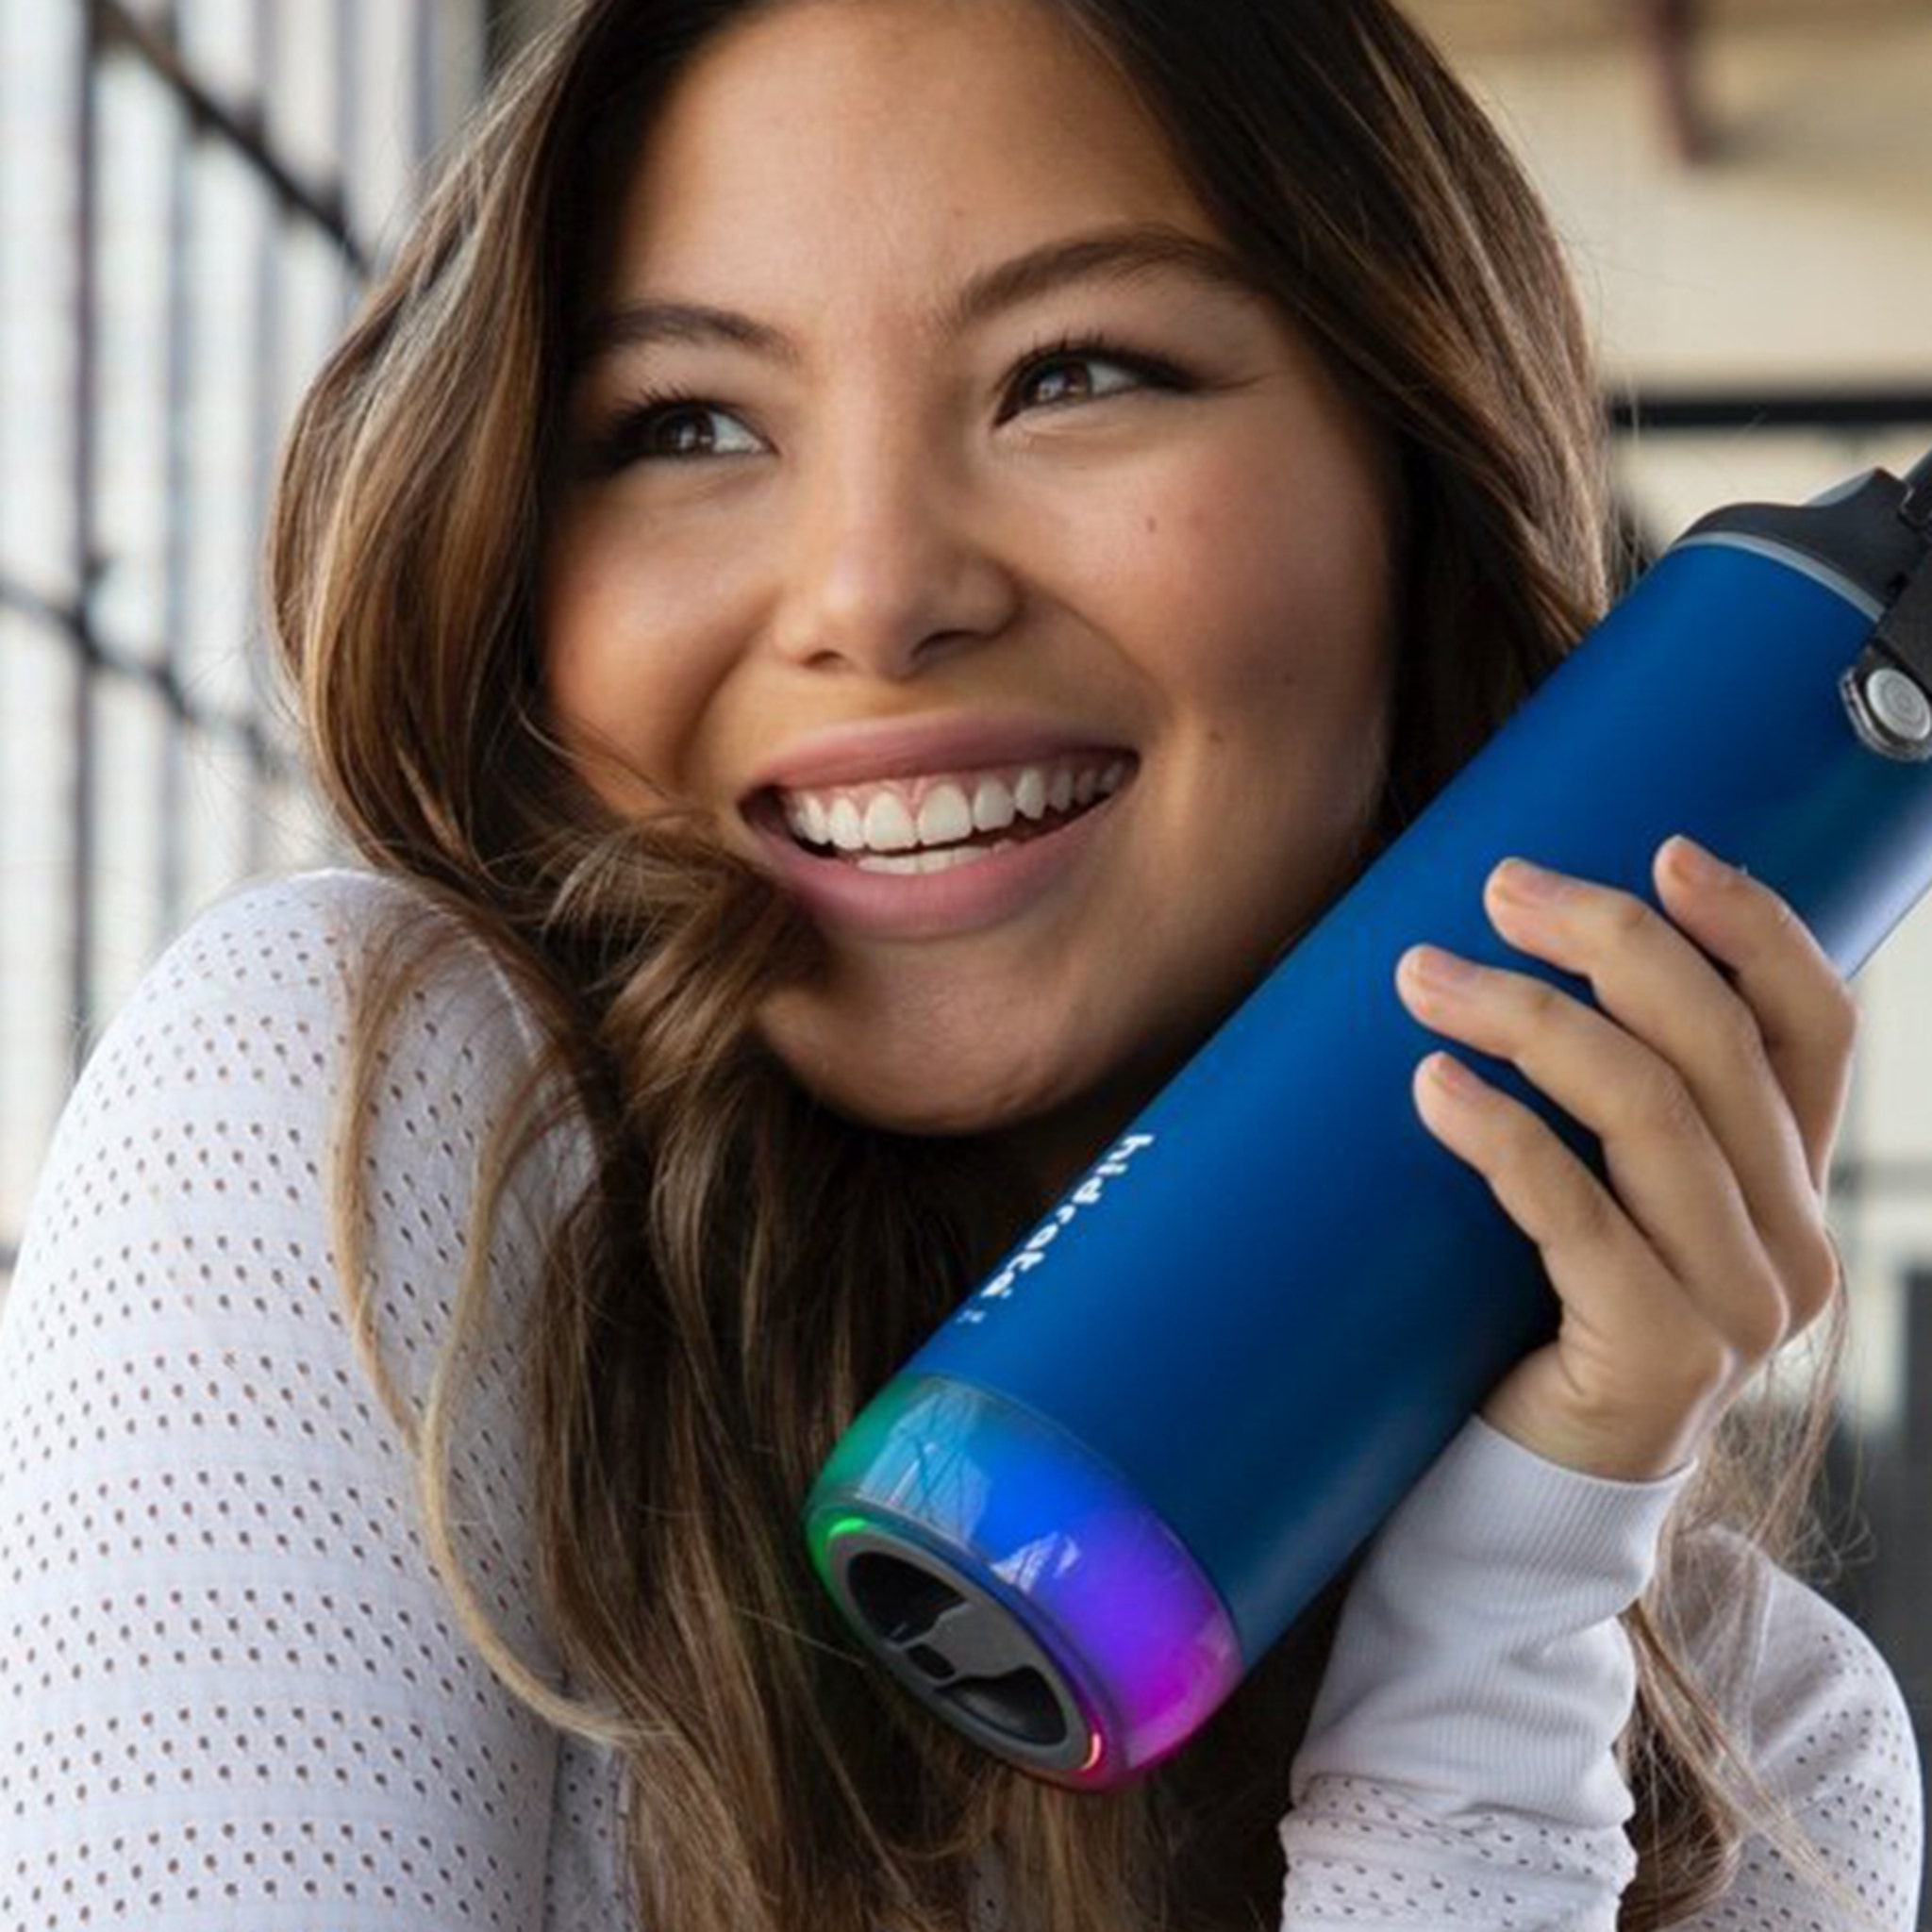 Smart' Water Bottle Tells You To Drink